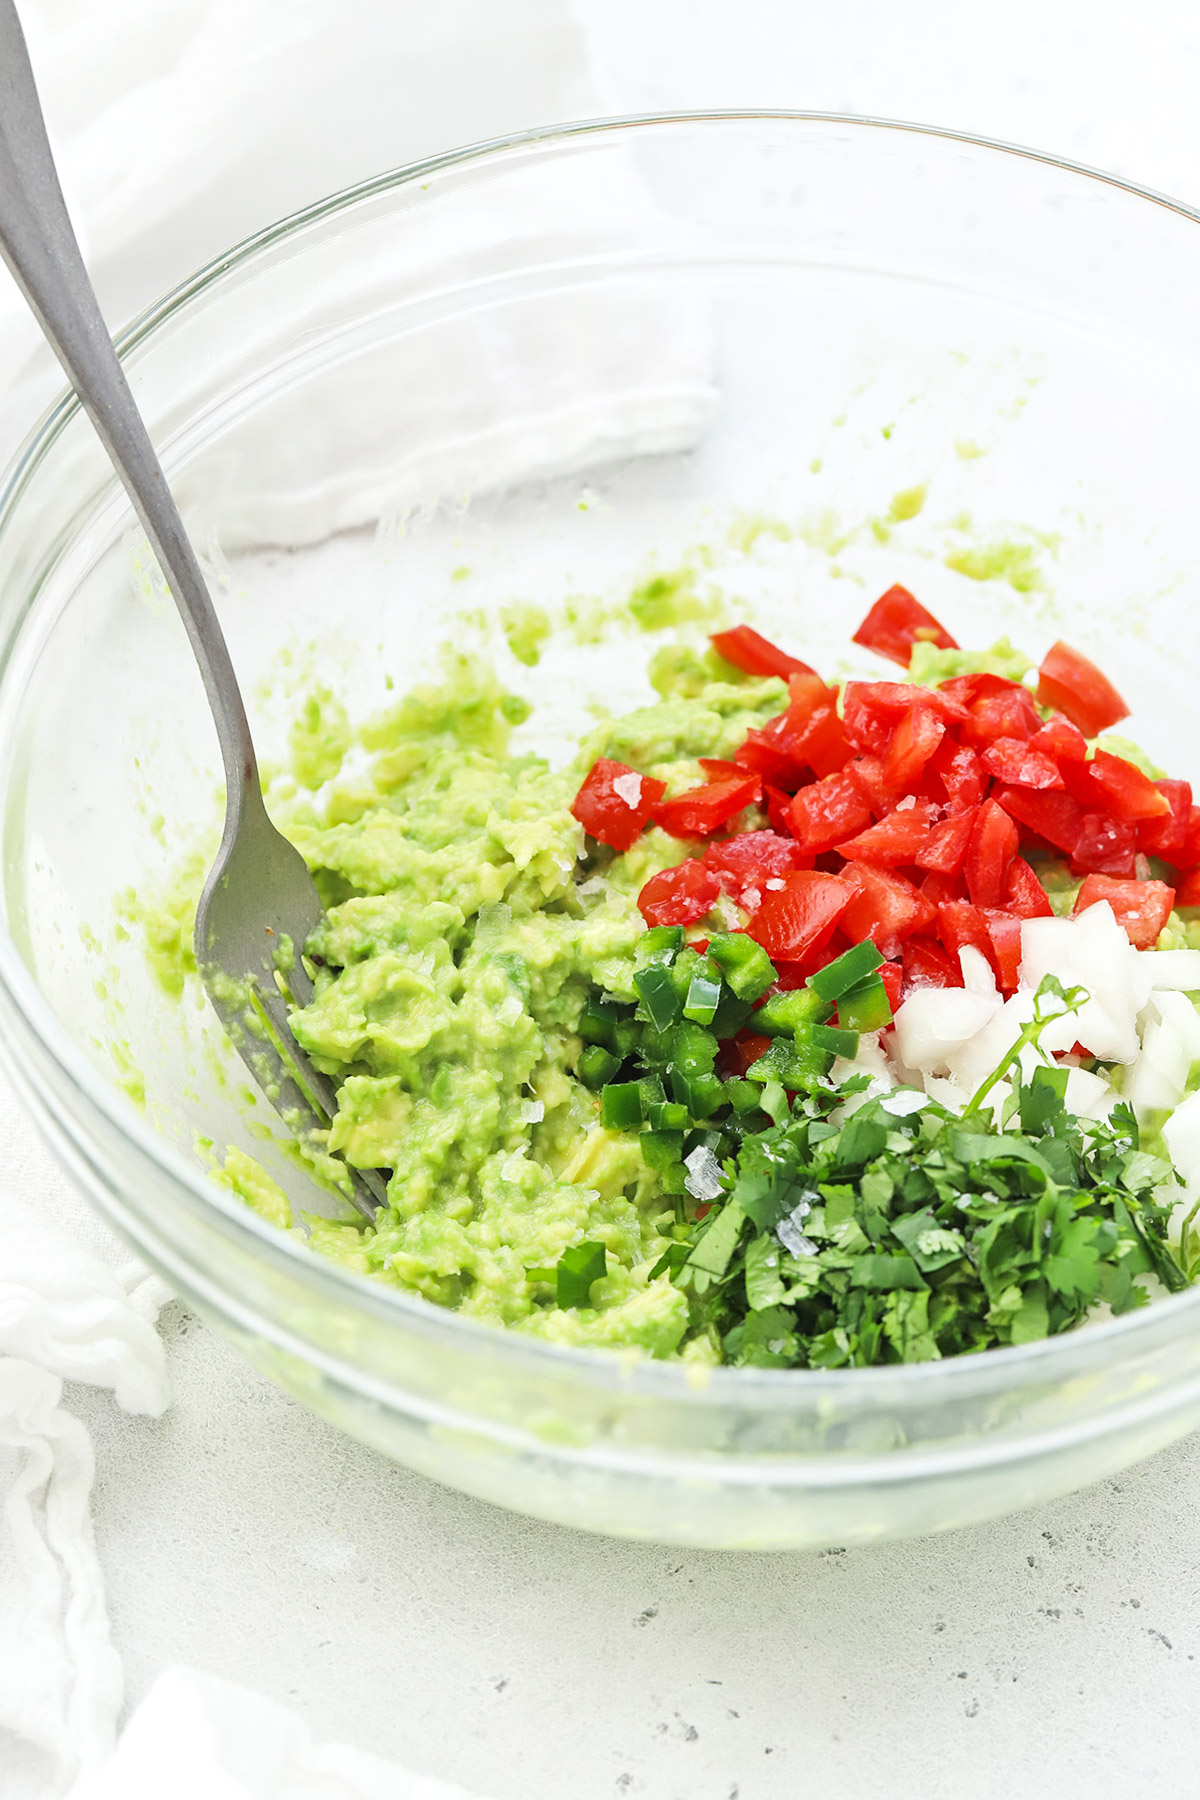 Overhead view of classic guacamole with tomatoes & jalapeño